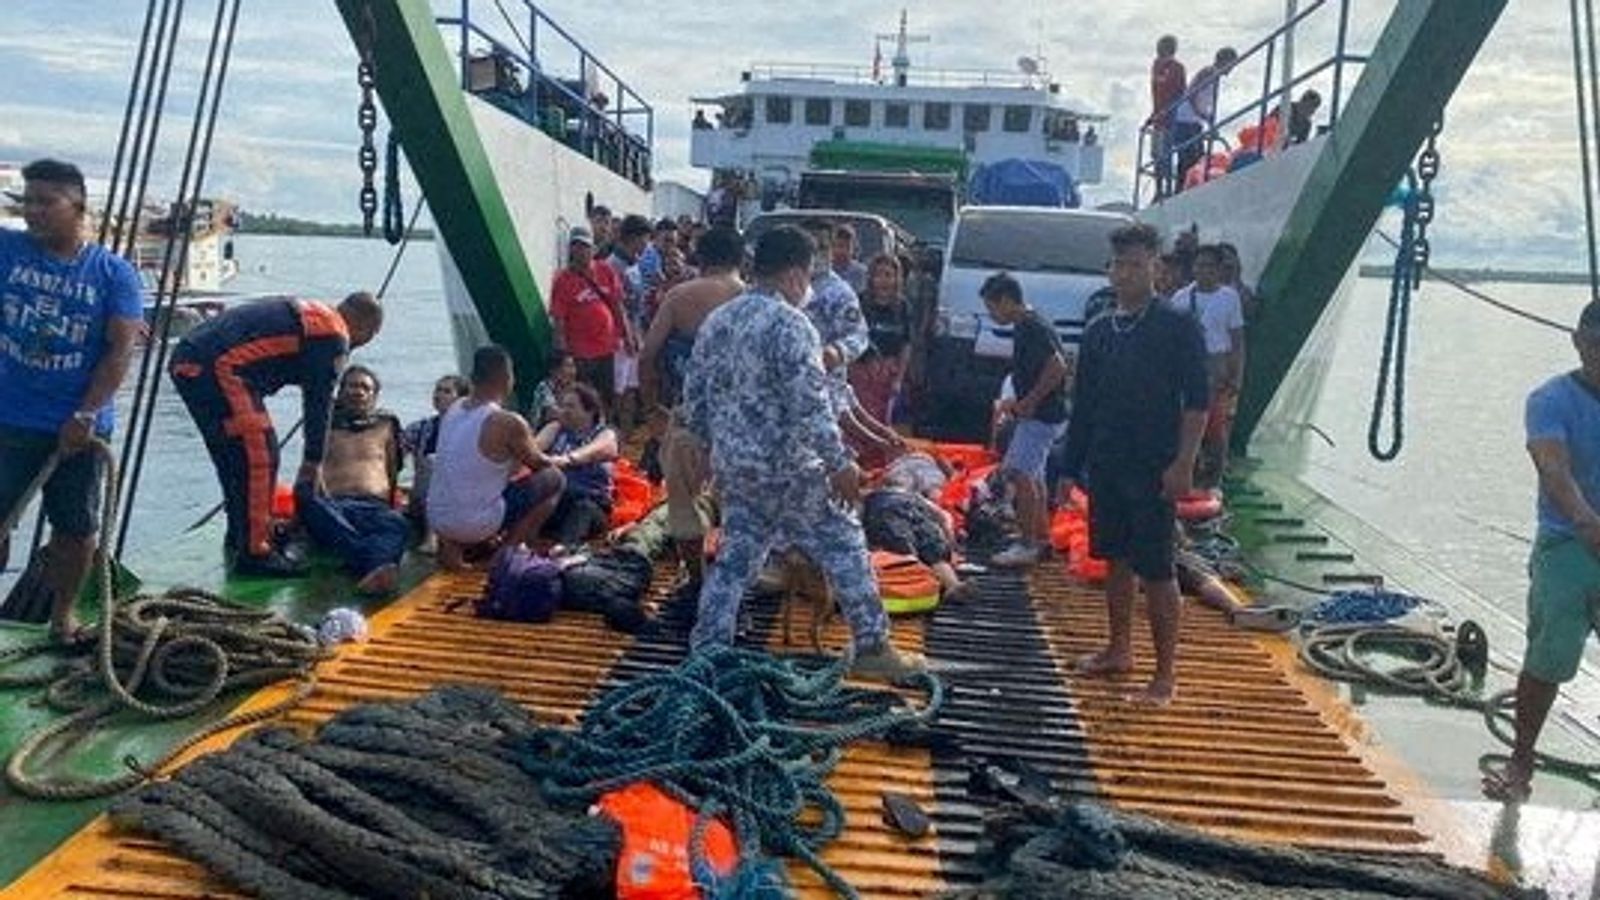 Philippine ferry fire: At least seven dead and more than 120 rescued after blaze